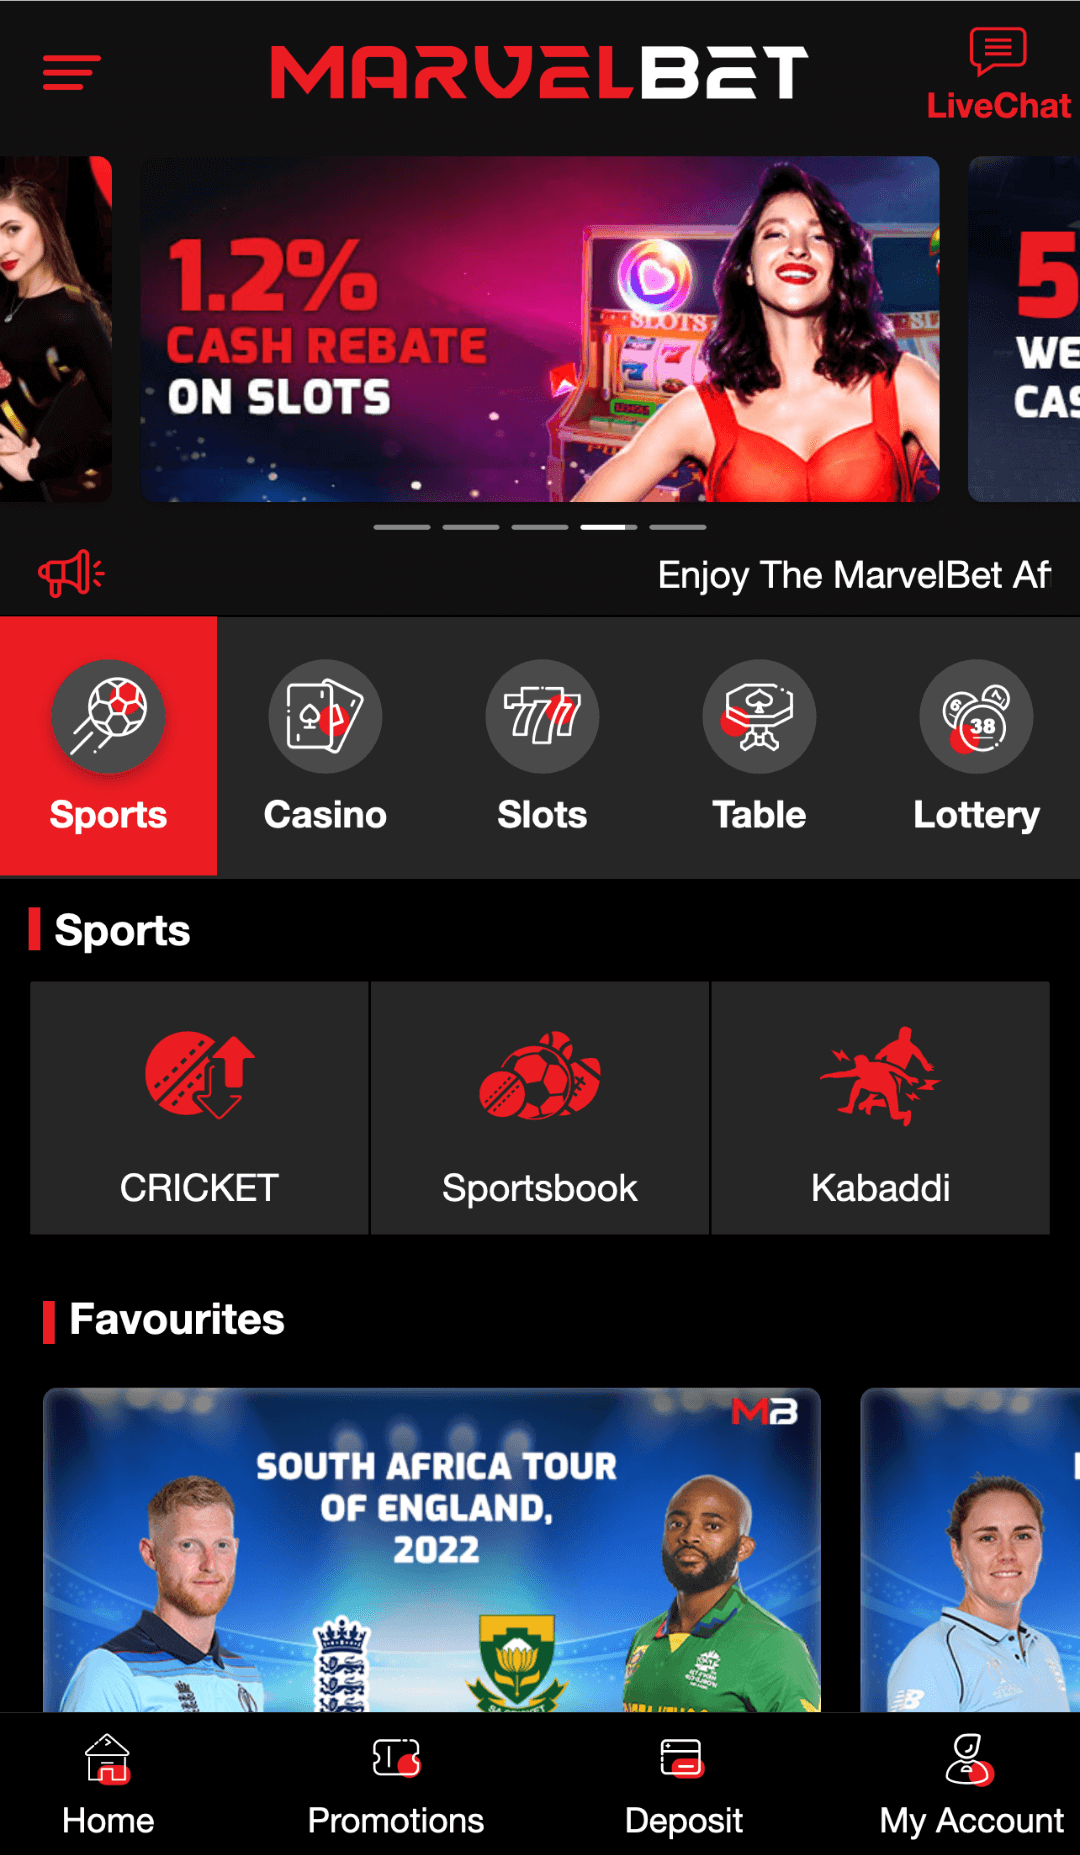 Home section in the Marvelbet mobile application